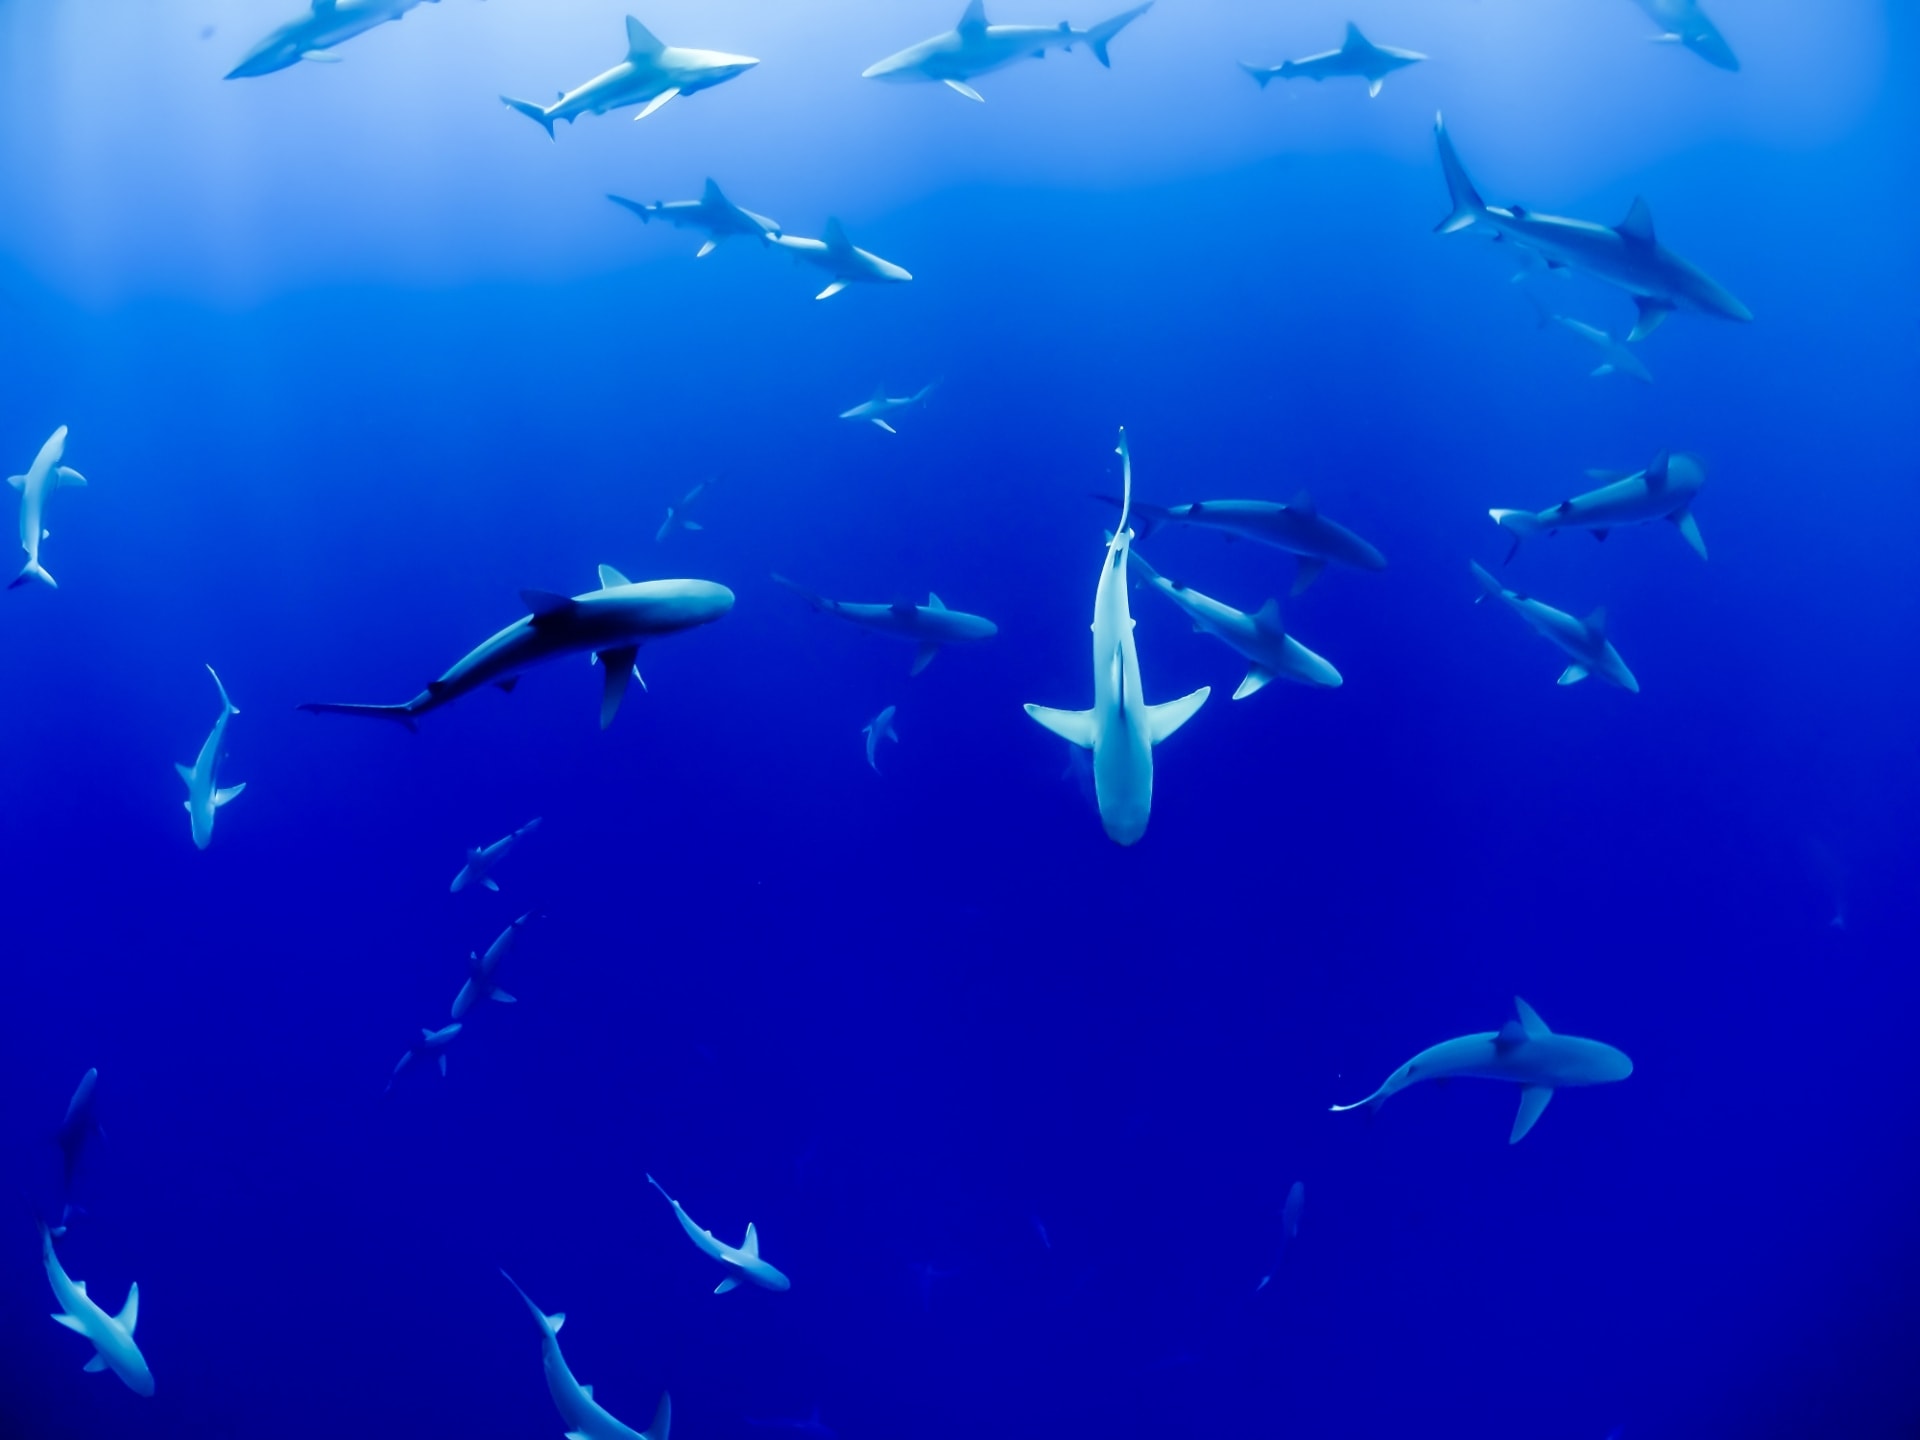 Underwater life showing sharks